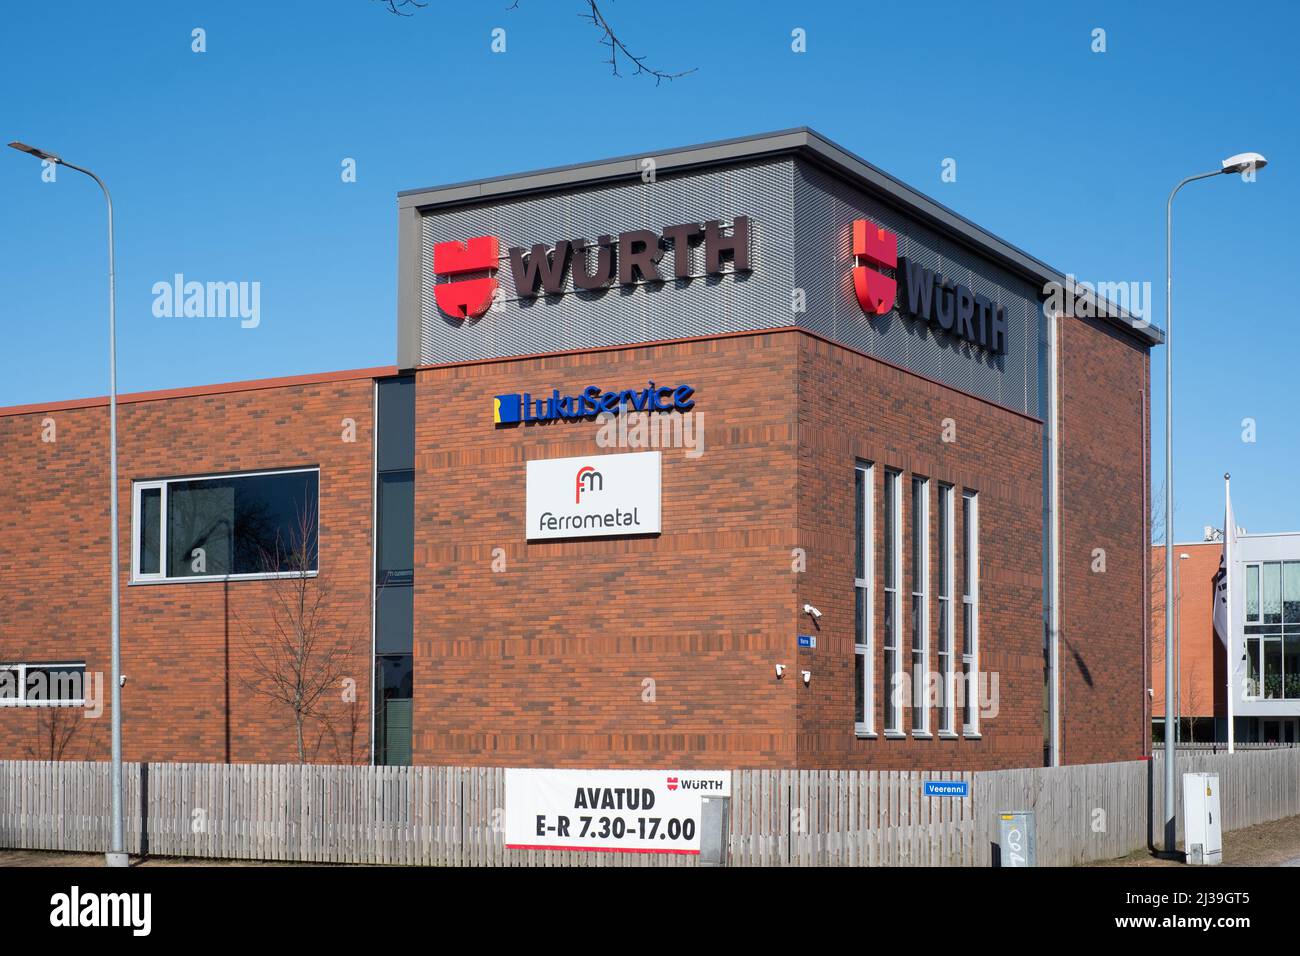 Würth building. Würth Group is an old German assembly and fastening materials sale company. Stock Photo